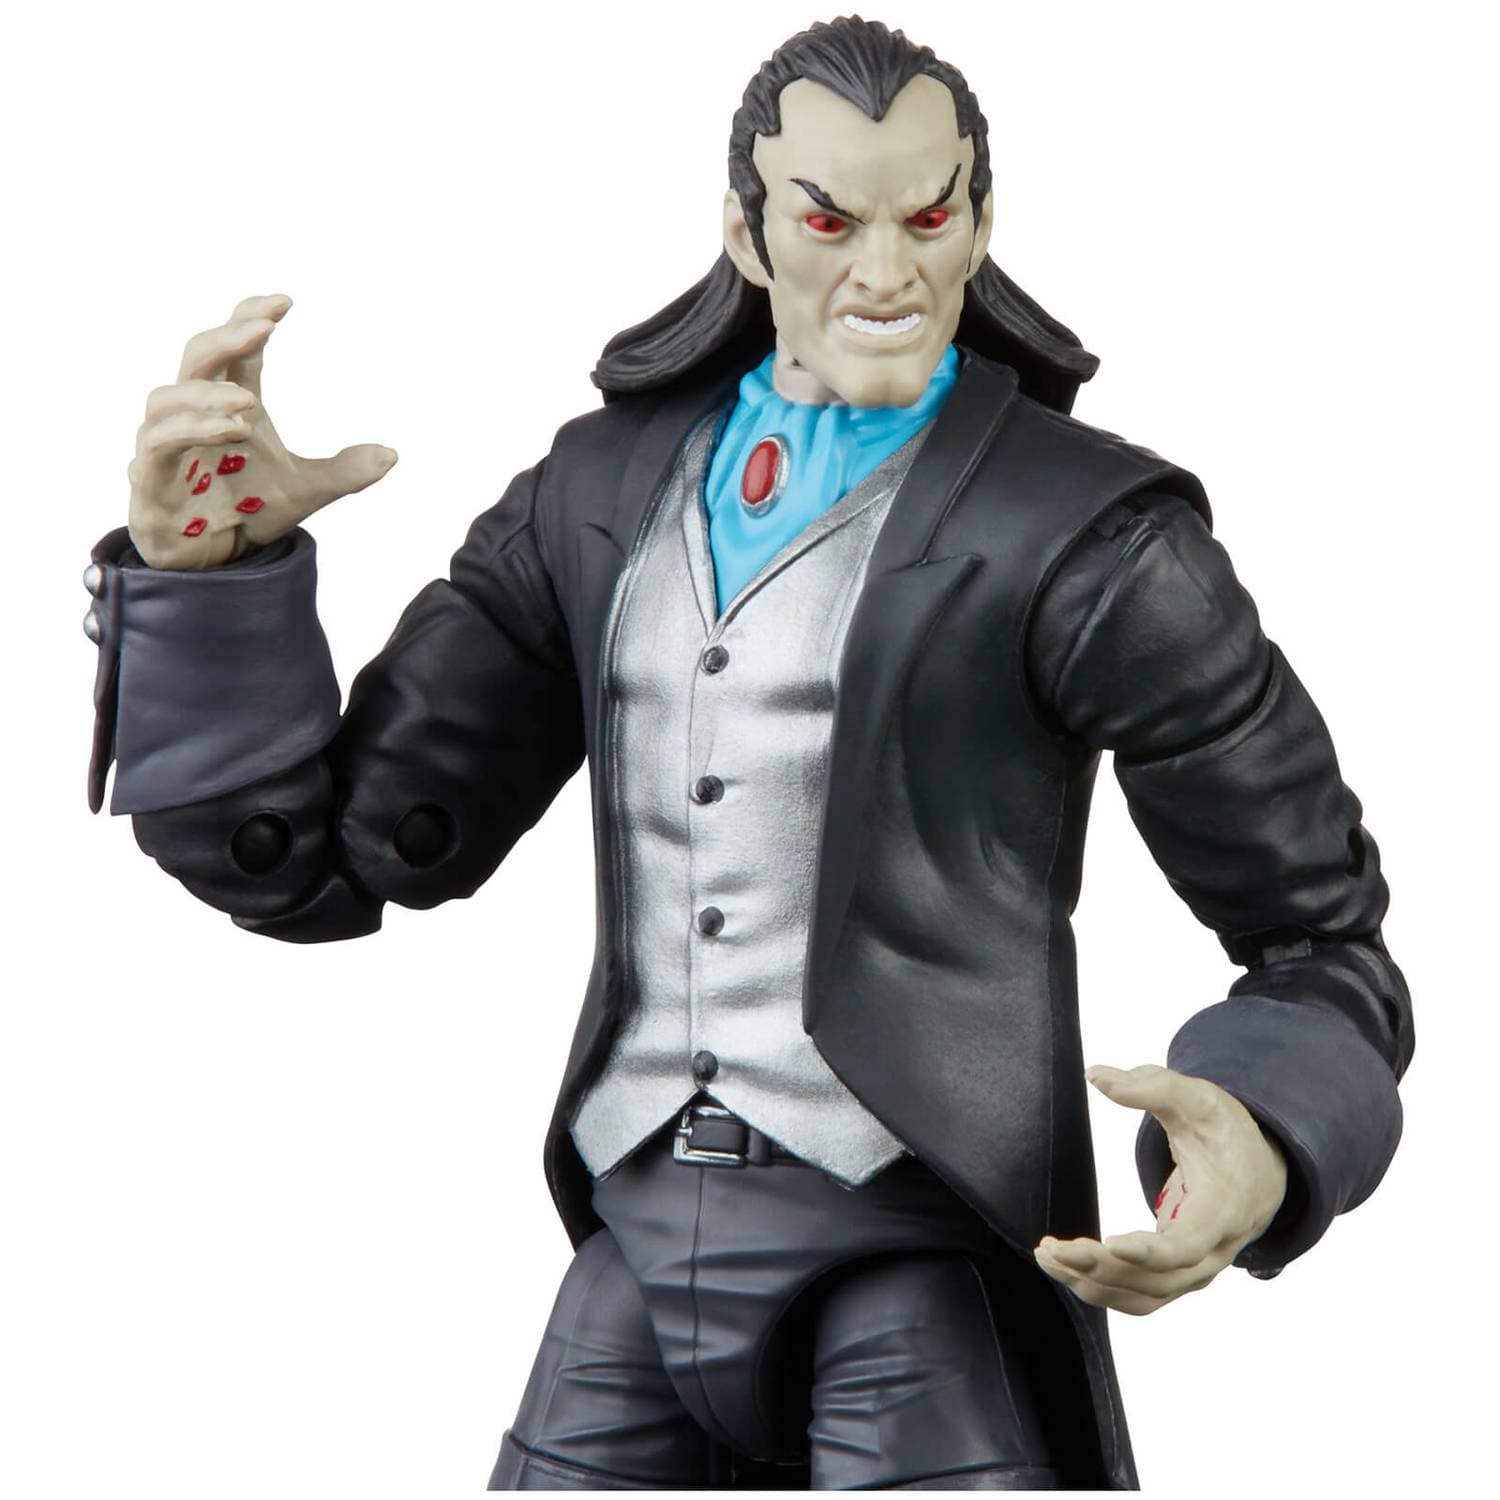 Close up - Hasbro Marvel Legends Series Morlun 6 Inch Action Figure and Build-A-Figure Part